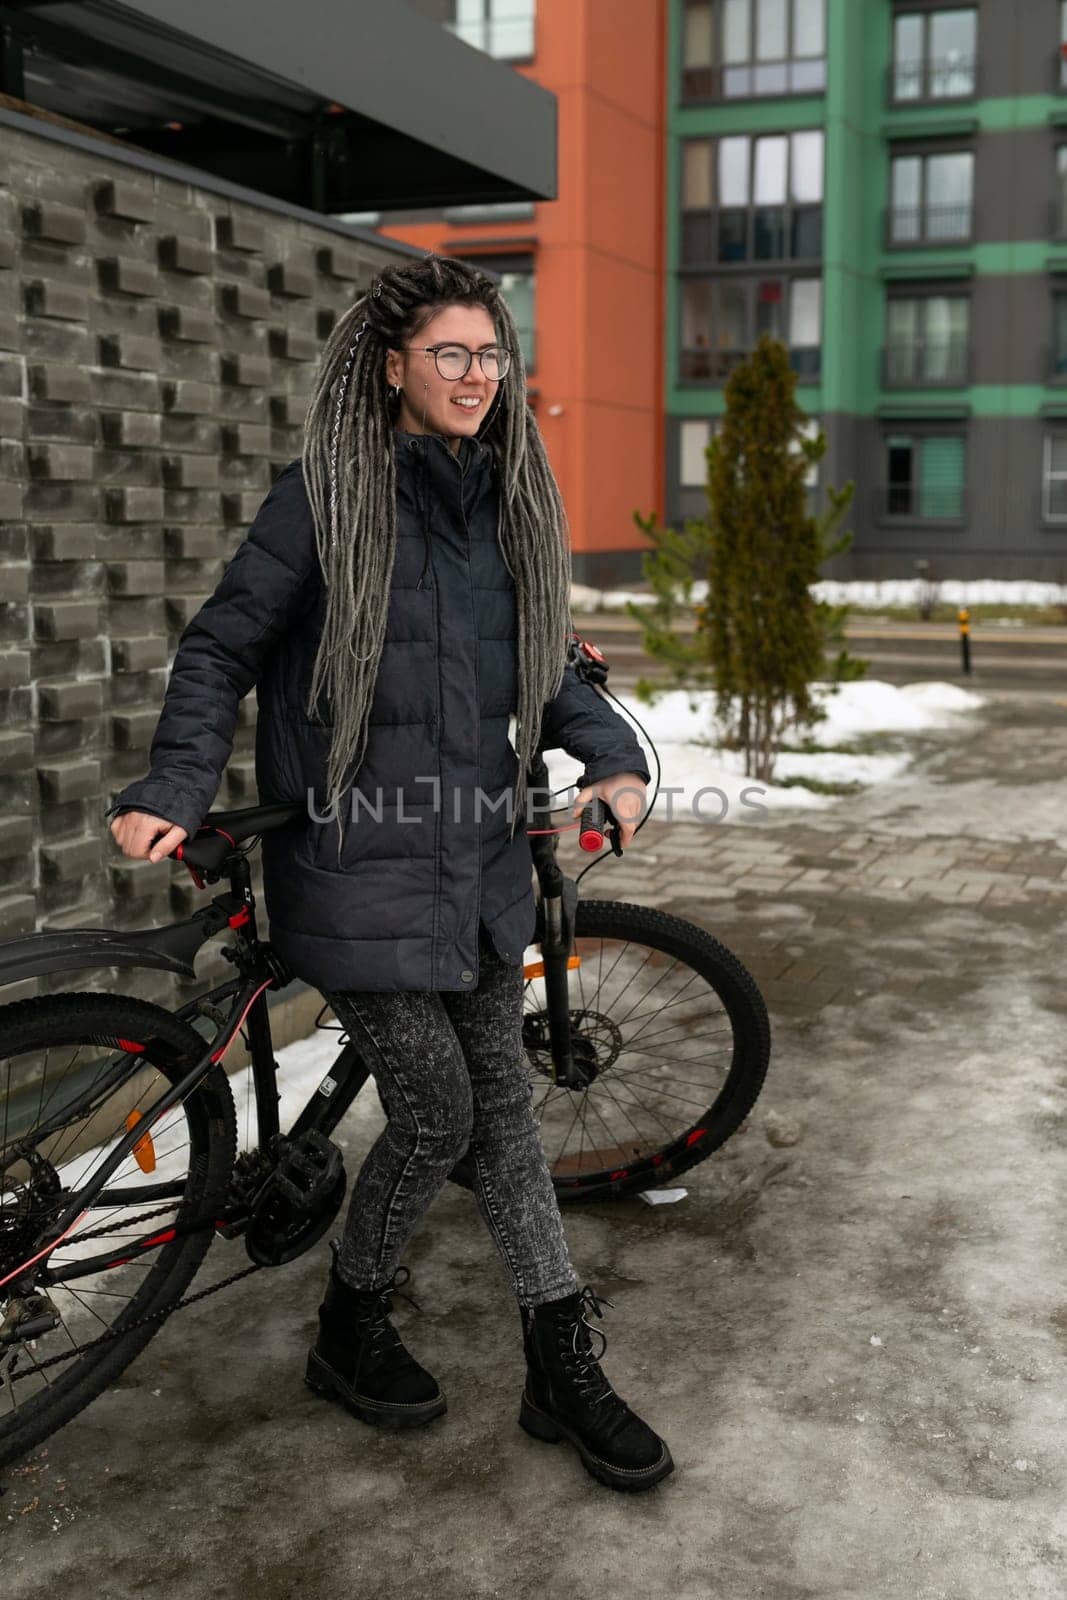 Lifestyle concept, a young pretty European woman with pigtails dressed in a warm winter jacket rides around the city on a bicycle.